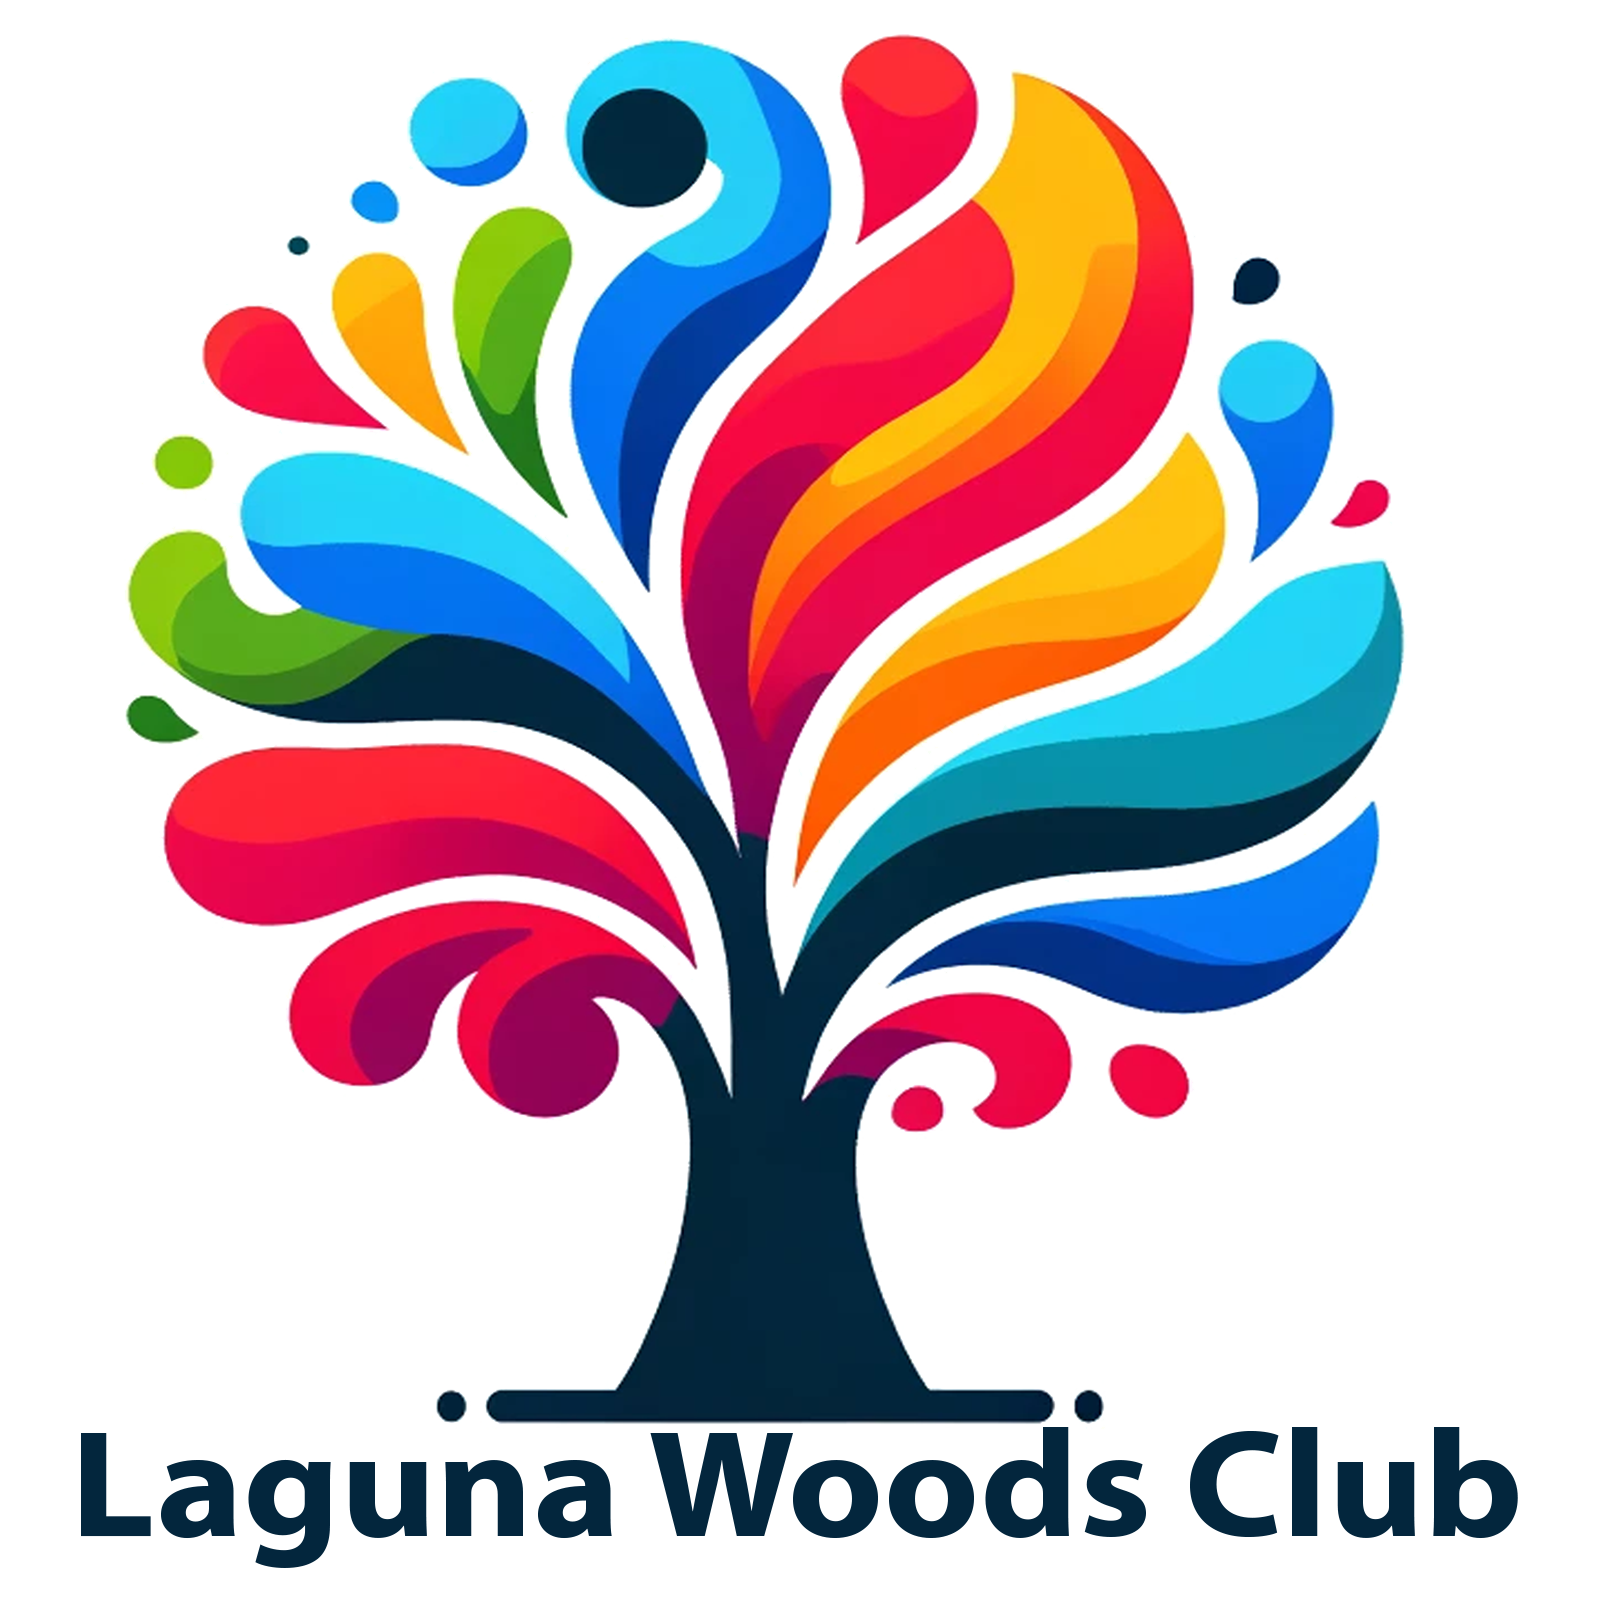 Your Hub for Laguna Woods Clubs